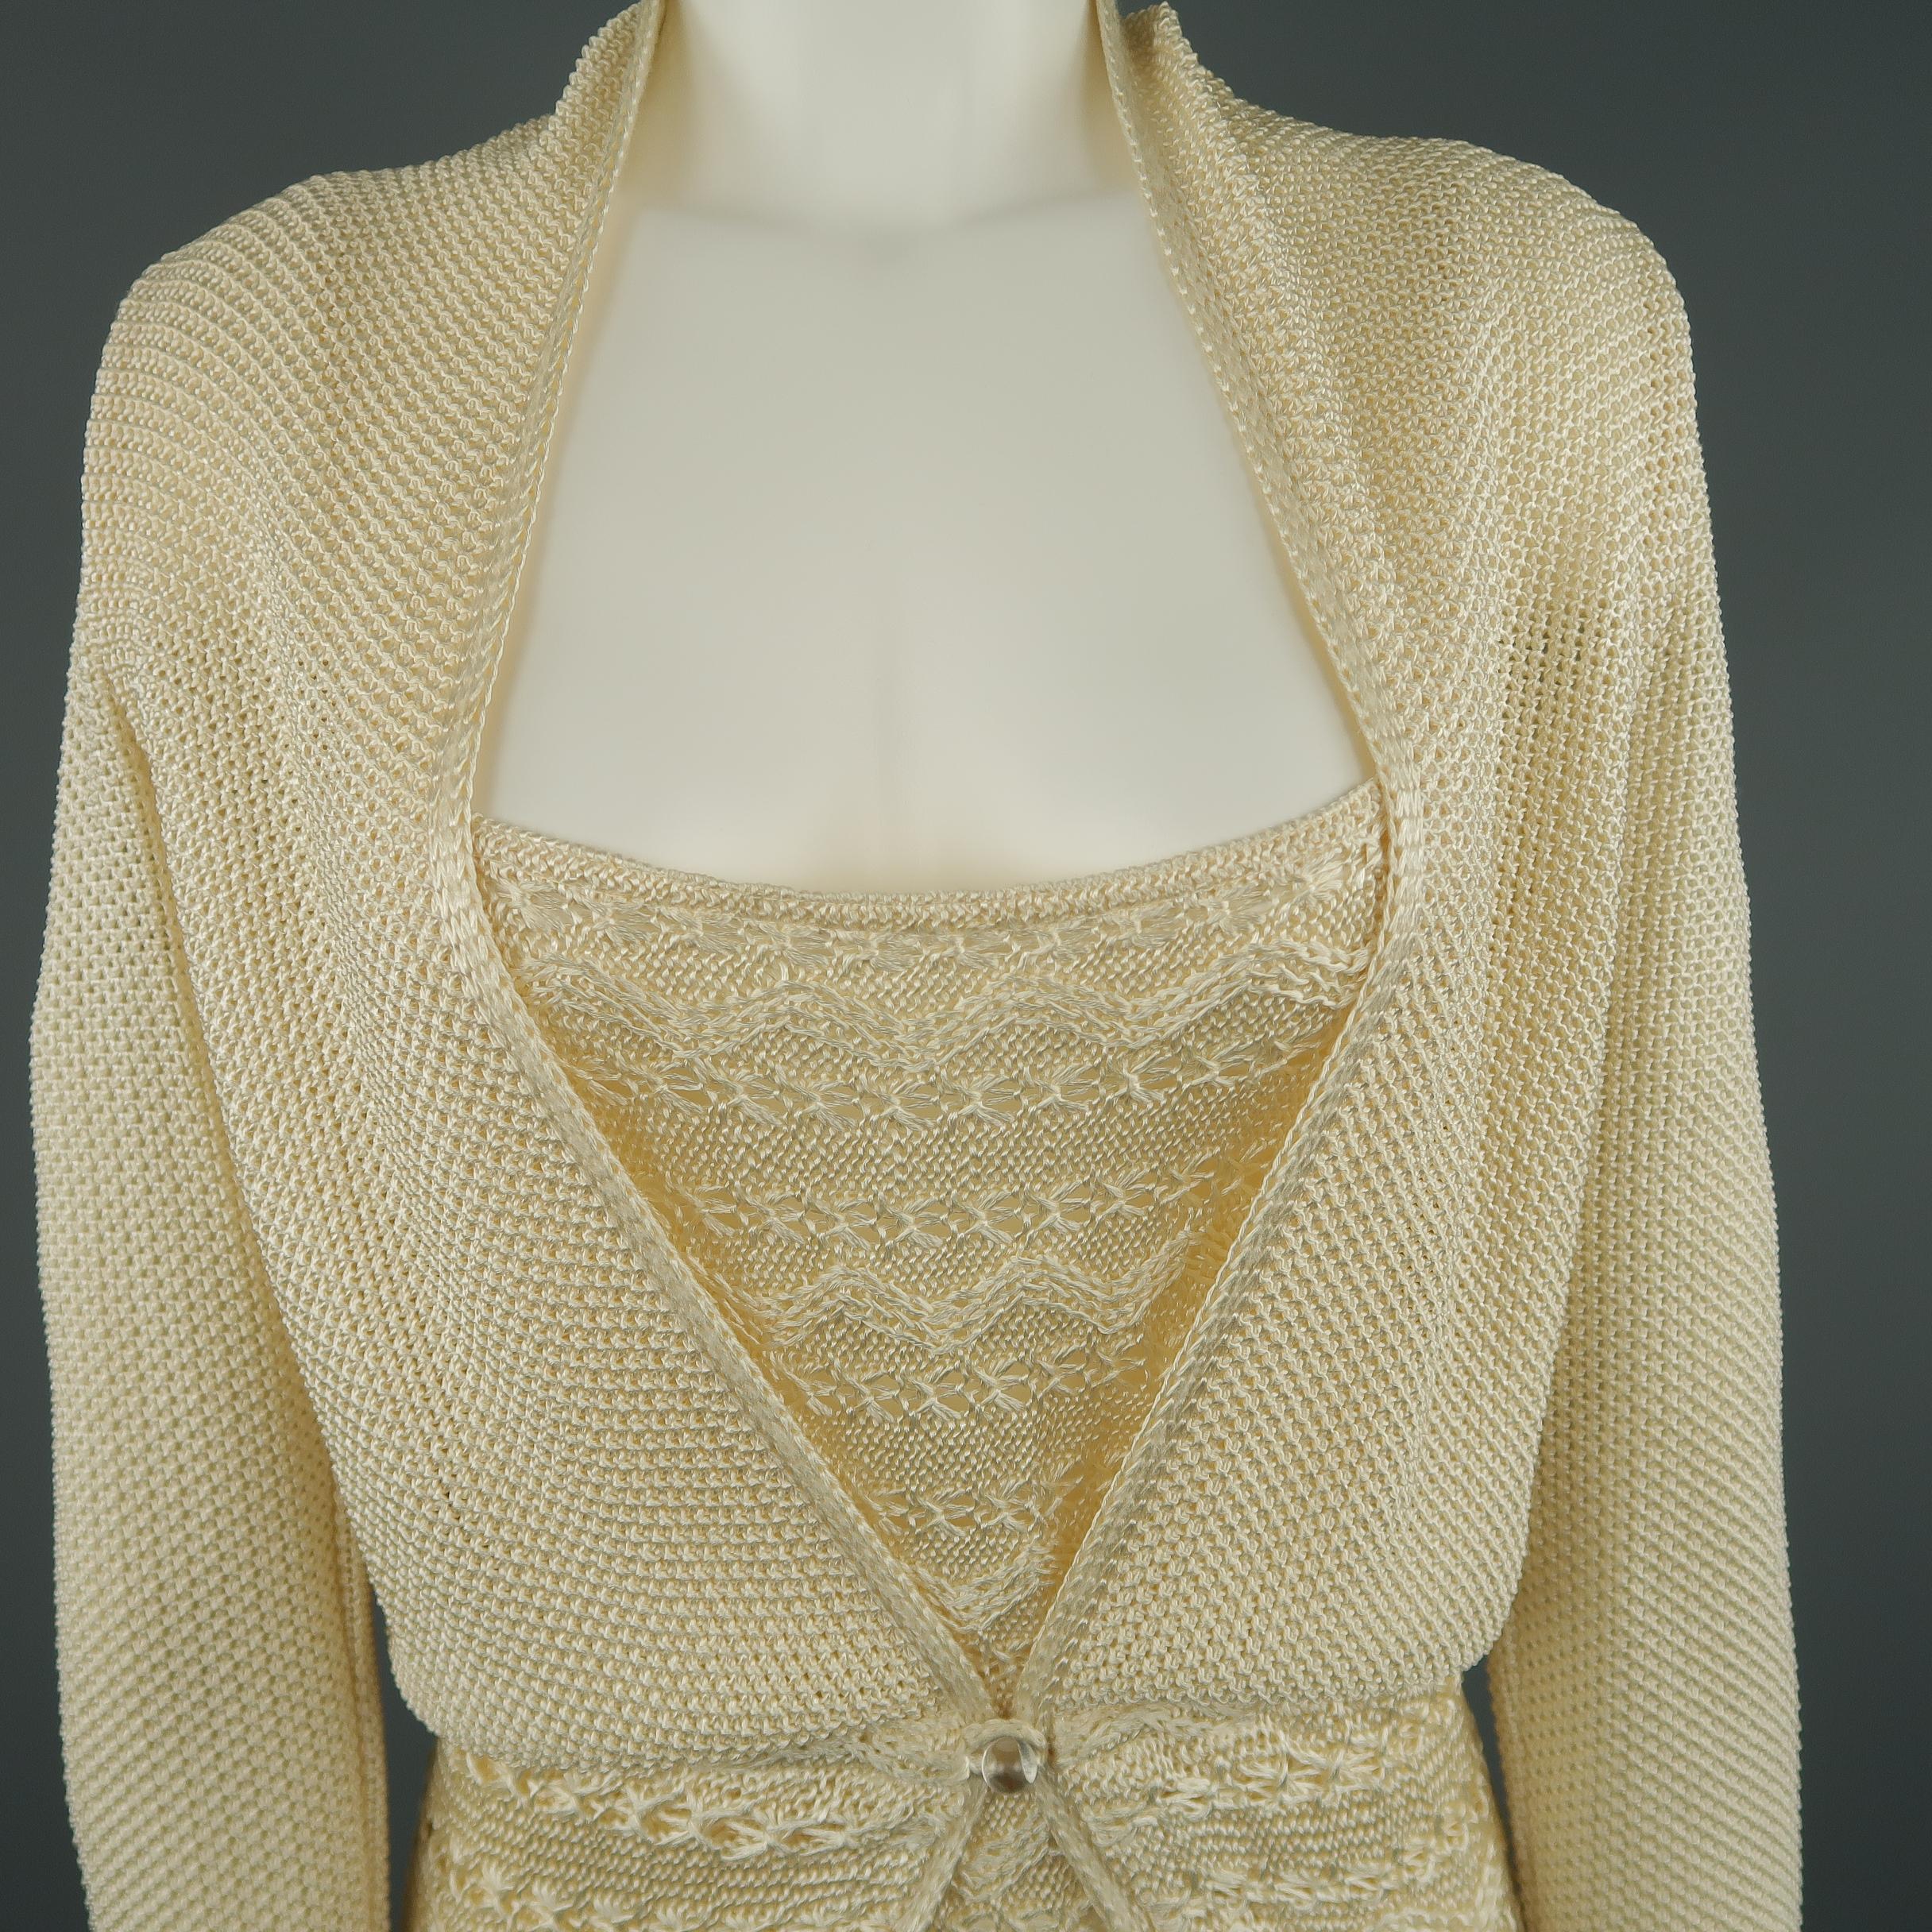 Vintage MISSONI sweater set comes in a cream rayon knit and includes a single button cardigan and matching double strap camisole. Made in Italy.
 
New with Tags.
Marked: 8
 
Measurements:
 
Cardigan:
Shoulder: 16 in.
Bust: 34 in.
Sleeve: 25